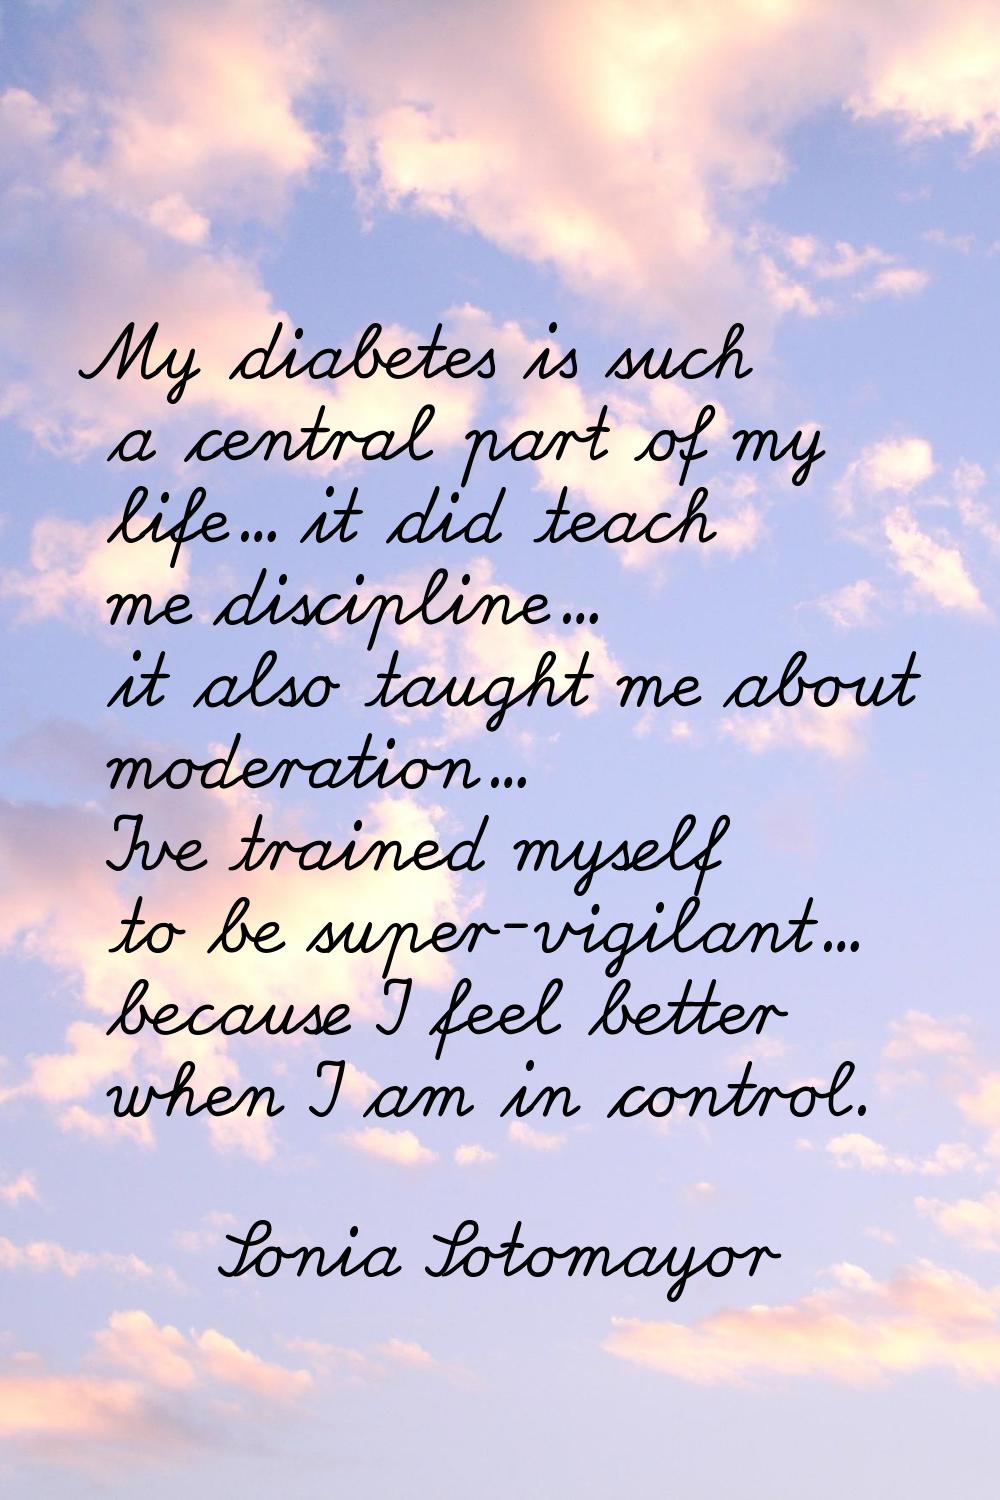 My diabetes is such a central part of my life... it did teach me discipline... it also taught me ab